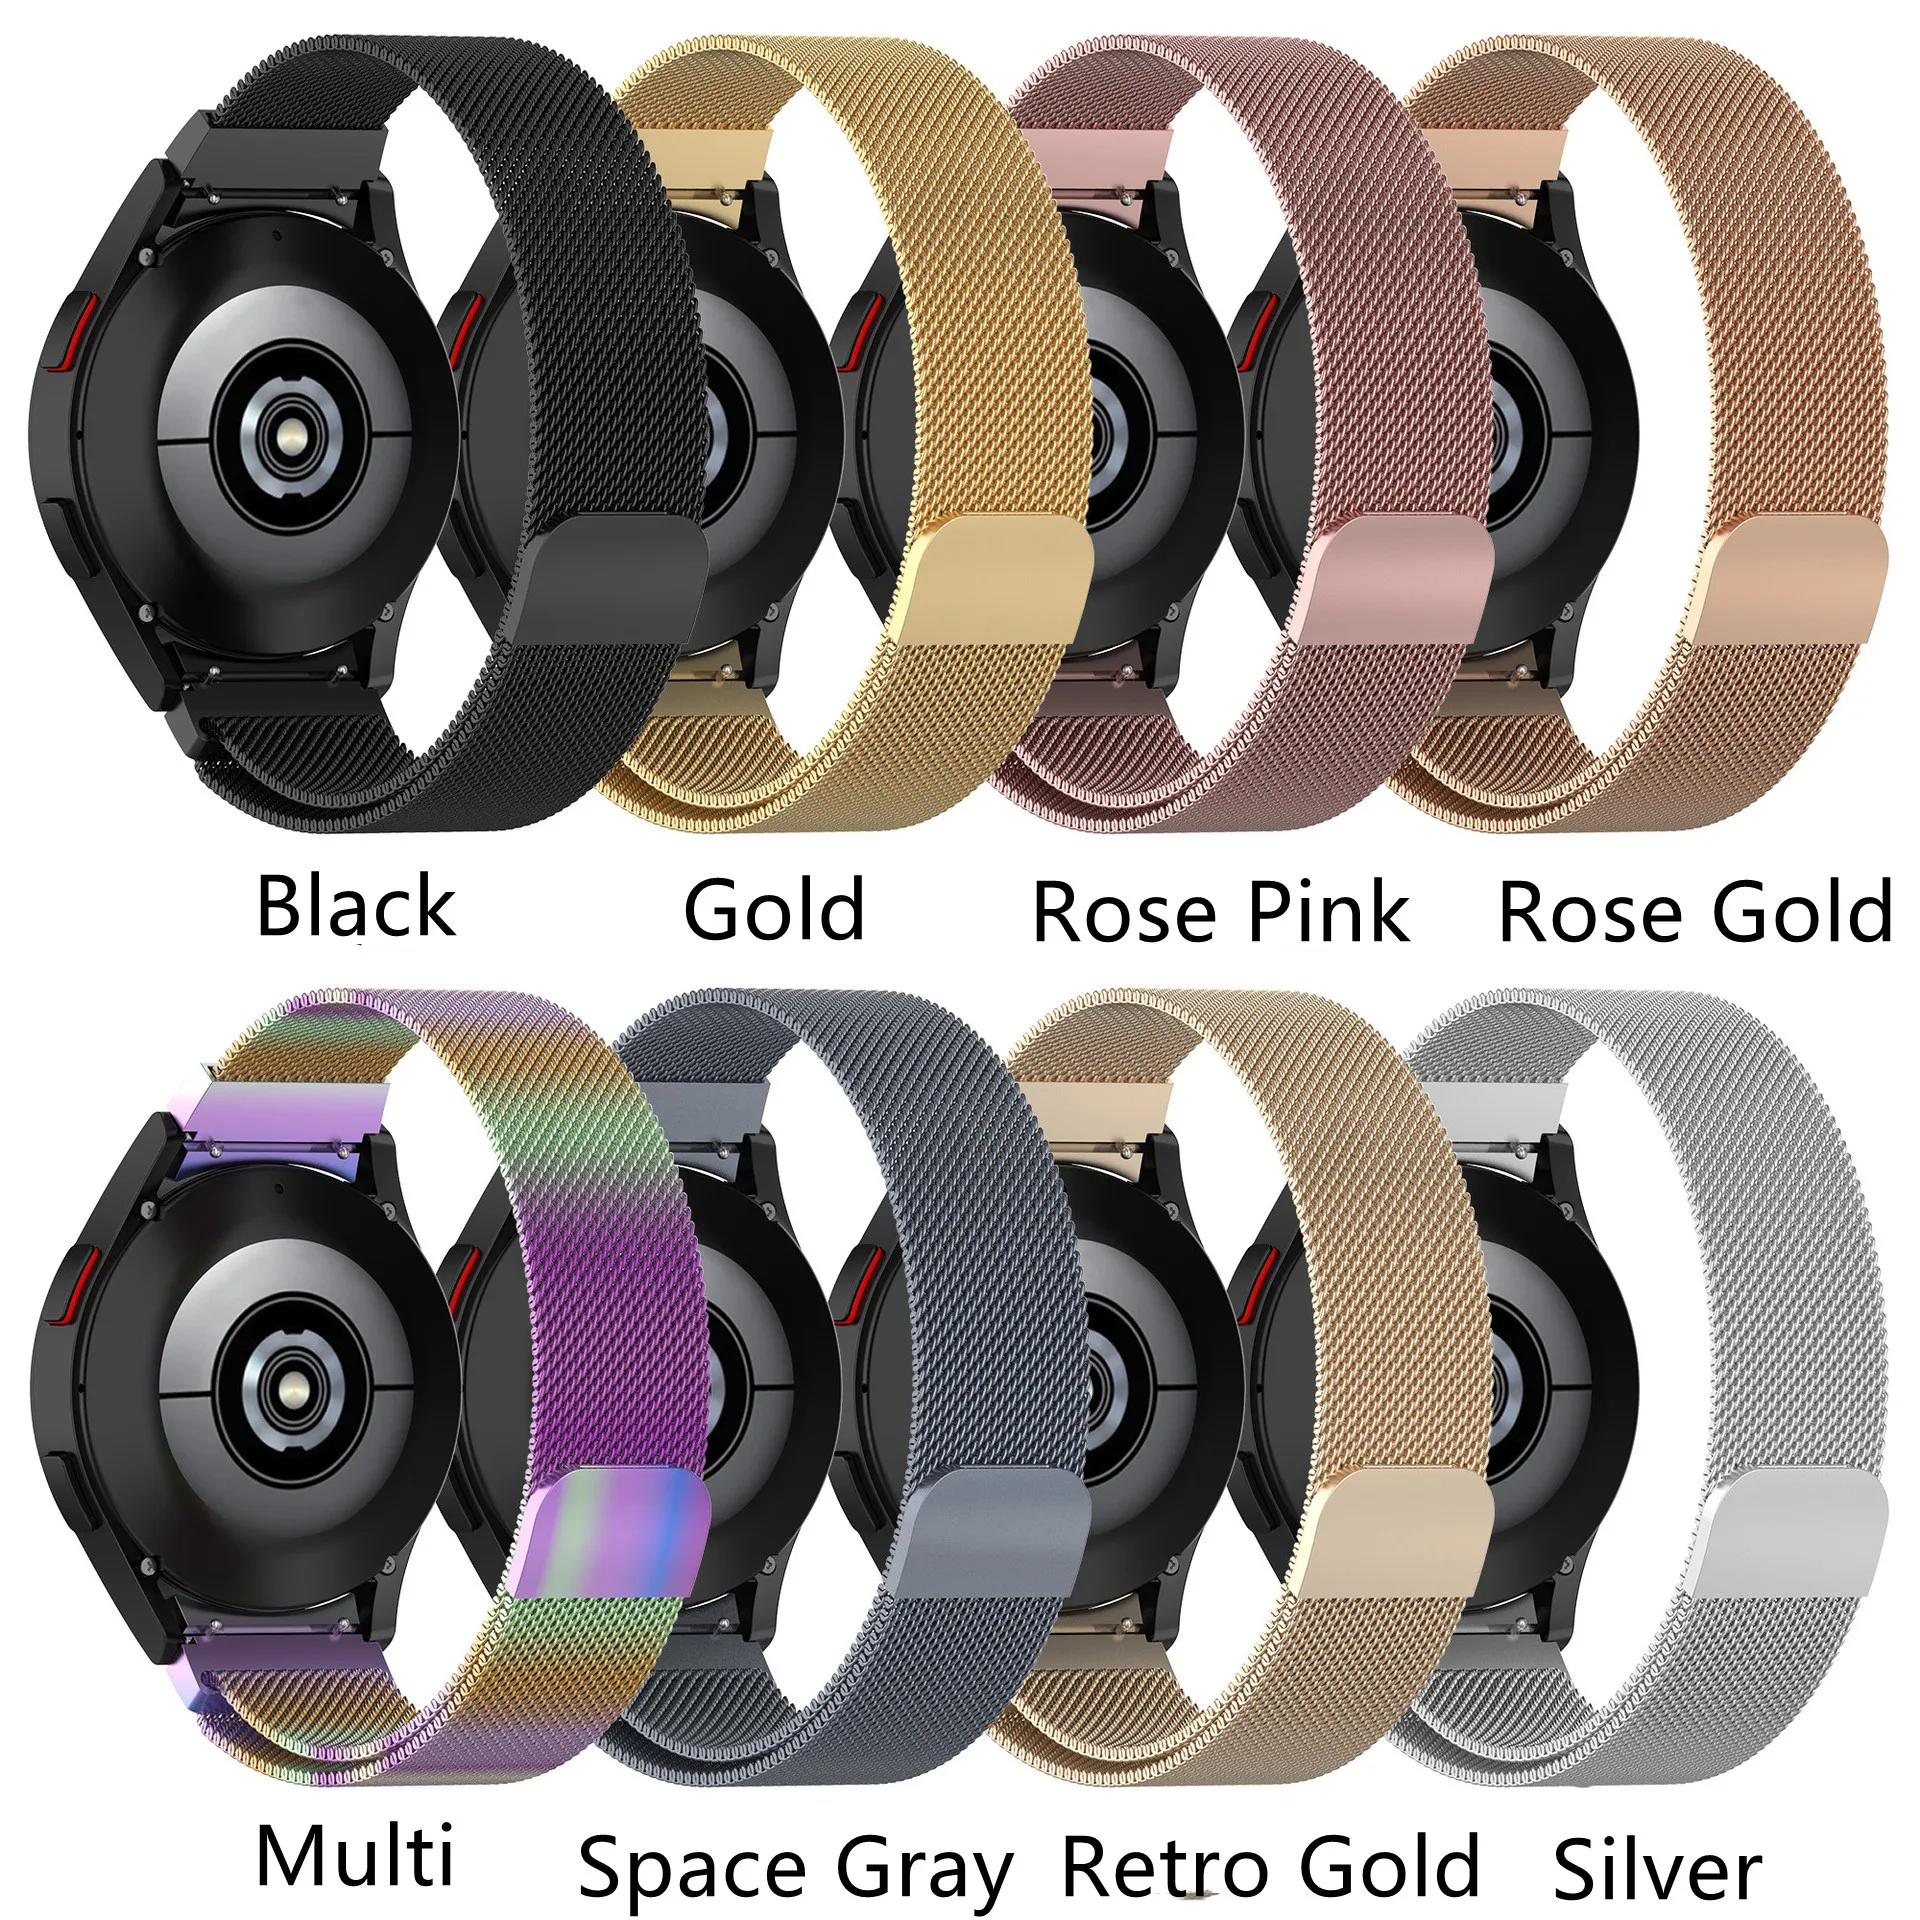 Metallic mesh watch strap with magnetic clasp closure, compatible with Samsung Galaxy Watch 4/5/6 models.